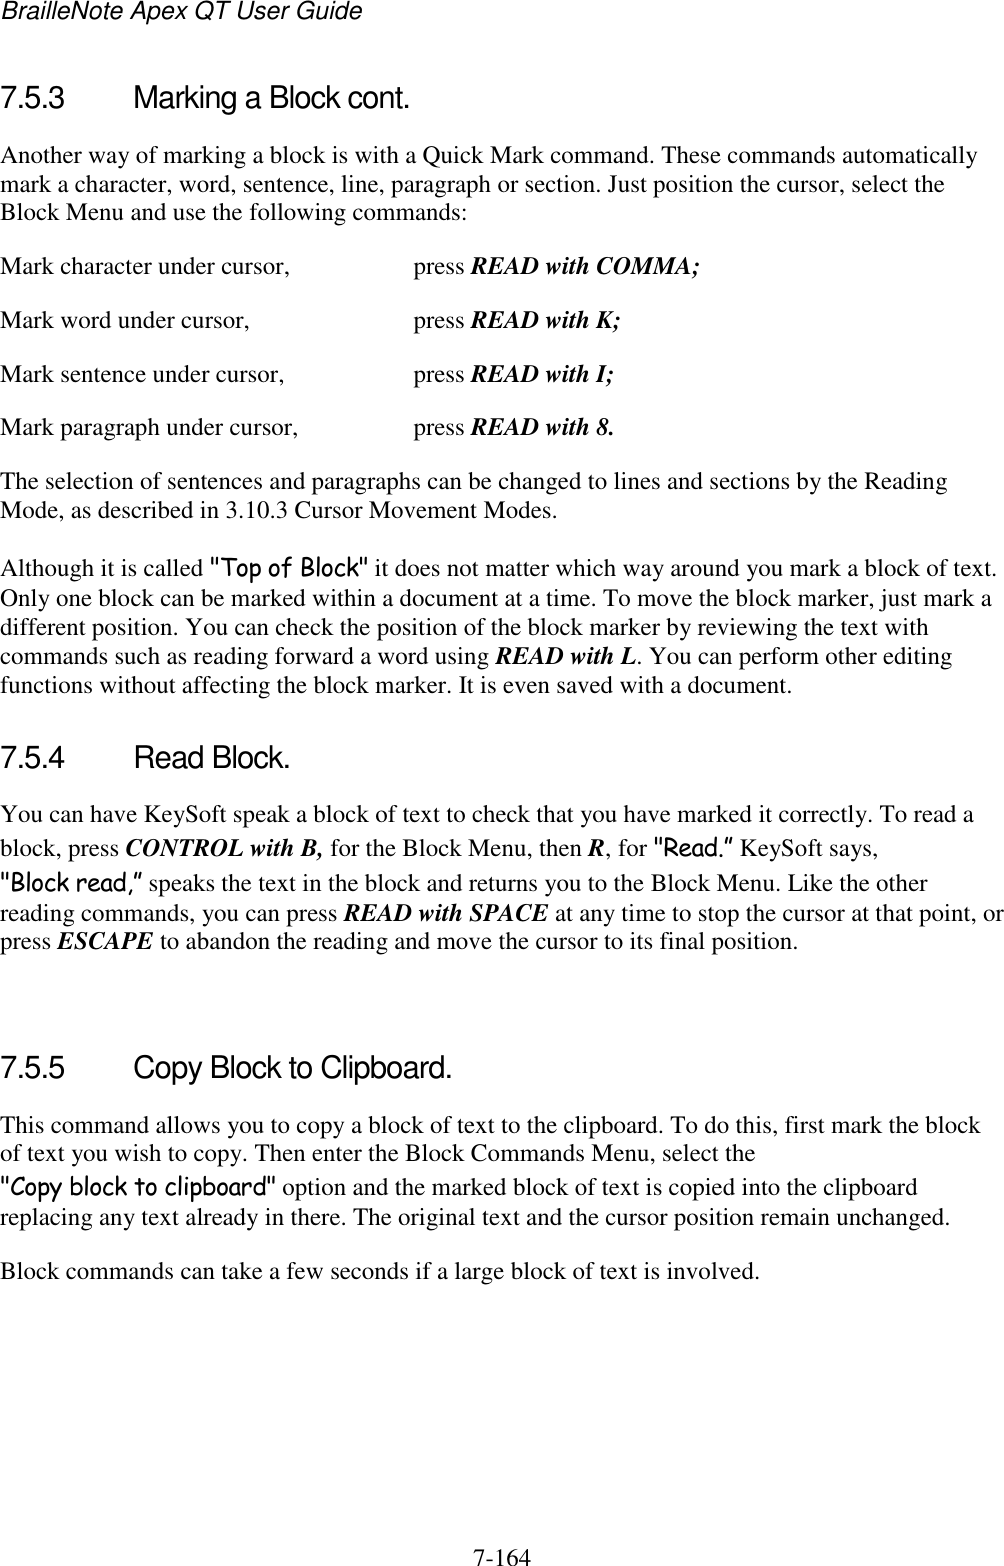 BrailleNote Apex QT User Guide  7-164   7.5.3  Marking a Block cont. Another way of marking a block is with a Quick Mark command. These commands automatically mark a character, word, sentence, line, paragraph or section. Just position the cursor, select the Block Menu and use the following commands: Mark character under cursor,  press READ with COMMA; Mark word under cursor,  press READ with K; Mark sentence under cursor,  press READ with I; Mark paragraph under cursor,  press READ with 8. The selection of sentences and paragraphs can be changed to lines and sections by the Reading Mode, as described in 3.10.3 Cursor Movement Modes. Although it is called &quot;Top of Block&quot; it does not matter which way around you mark a block of text. Only one block can be marked within a document at a time. To move the block marker, just mark a different position. You can check the position of the block marker by reviewing the text with commands such as reading forward a word using READ with L. You can perform other editing functions without affecting the block marker. It is even saved with a document.  7.5.4  Read Block. You can have KeySoft speak a block of text to check that you have marked it correctly. To read a block, press CONTROL with B, for the Block Menu, then R, for &quot;Read.” KeySoft says, &quot;Block read,” speaks the text in the block and returns you to the Block Menu. Like the other reading commands, you can press READ with SPACE at any time to stop the cursor at that point, or press ESCAPE to abandon the reading and move the cursor to its final position.   7.5.5  Copy Block to Clipboard. This command allows you to copy a block of text to the clipboard. To do this, first mark the block of text you wish to copy. Then enter the Block Commands Menu, select the &quot;Copy block to clipboard&quot; option and the marked block of text is copied into the clipboard replacing any text already in there. The original text and the cursor position remain unchanged. Block commands can take a few seconds if a large block of text is involved.   